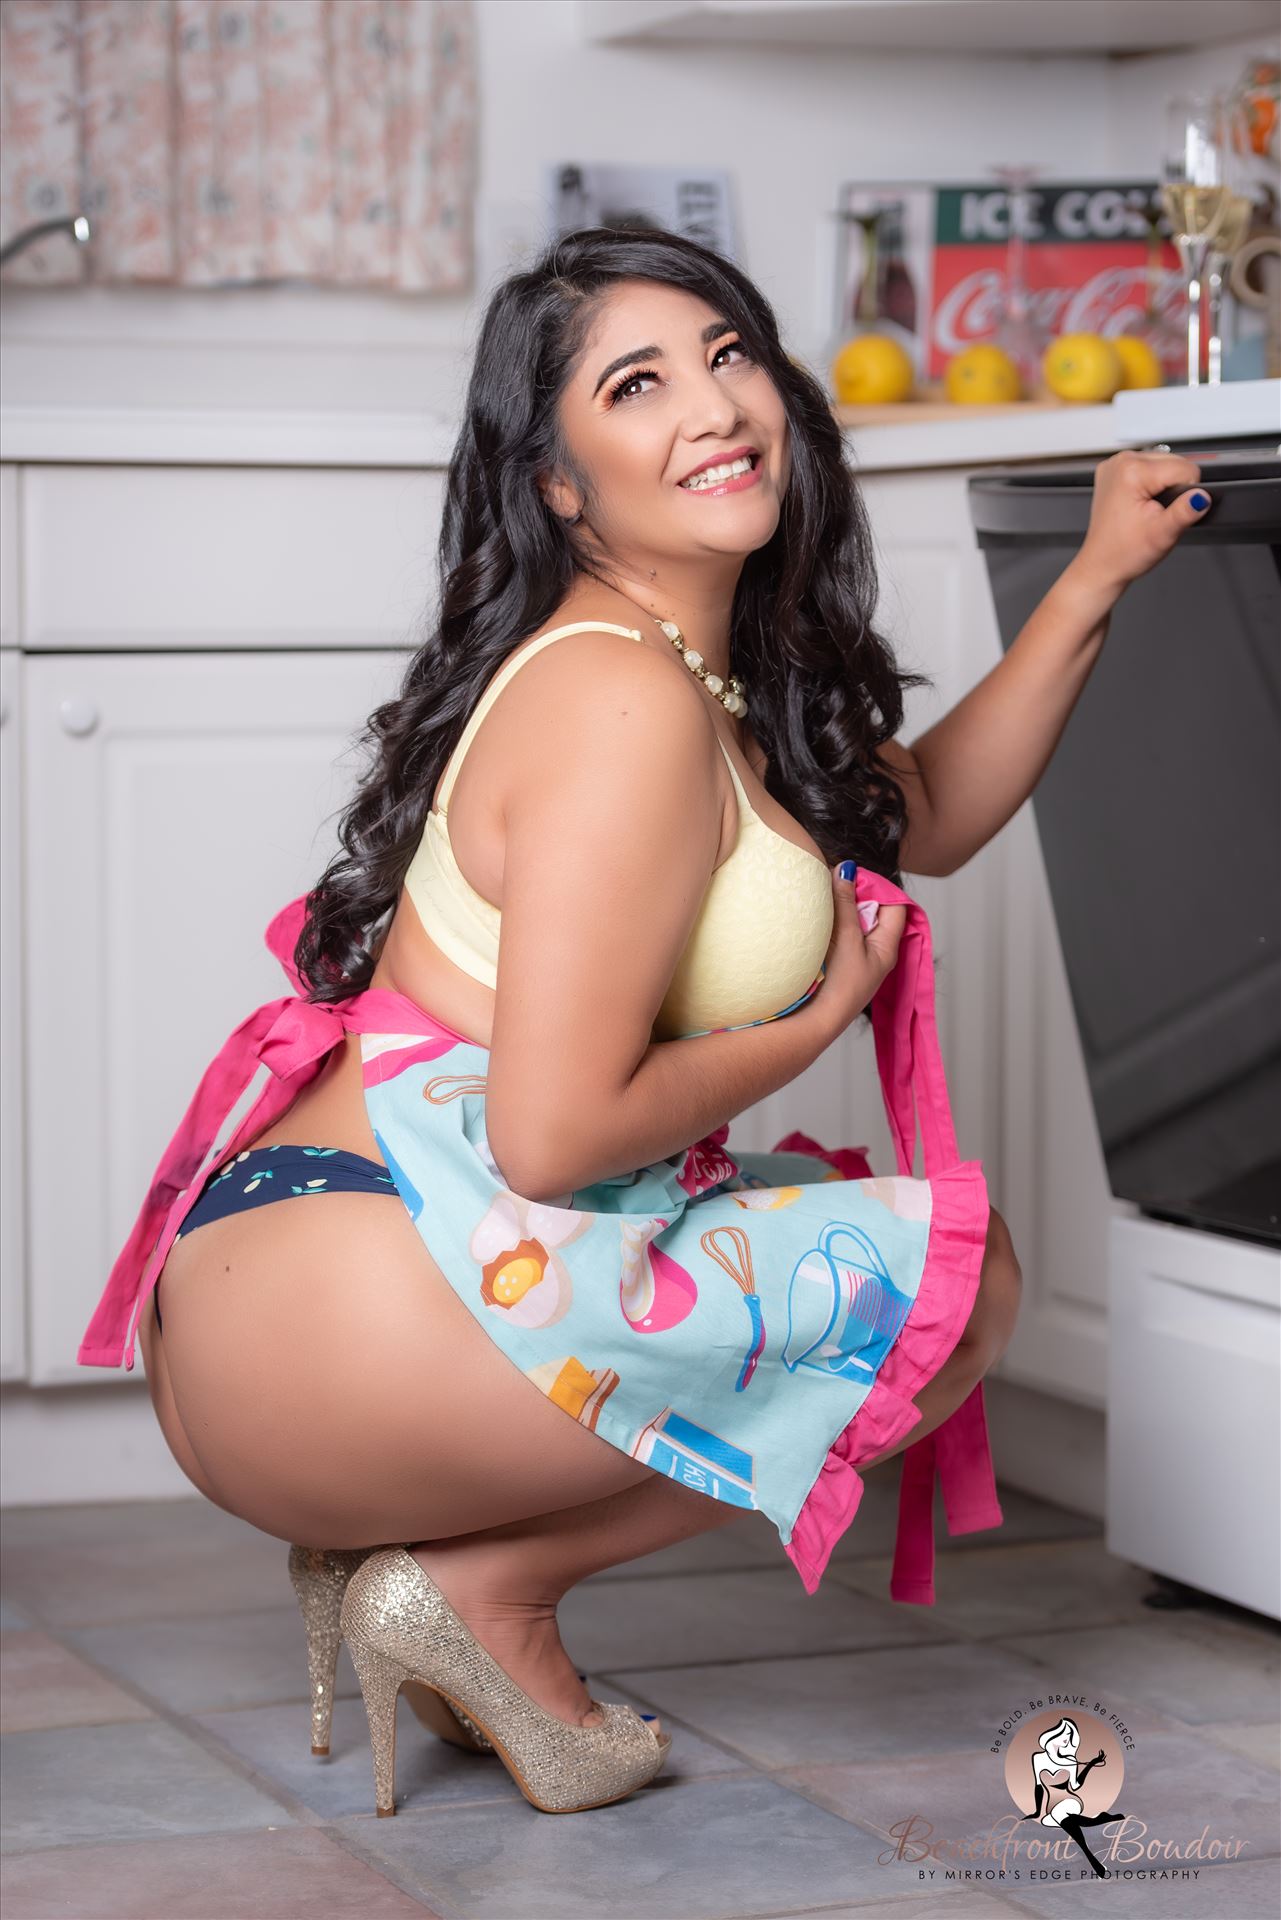 Port-8196.JPG - Beachfront Boudoir by Mirror's Edge Photography is a Boutique Luxury Boudoir Photography Studio located just blocks from the beach in Oceano, California. My mission is to show as many women as possible how beautiful they truly are! Pin Up kitchen. by Sarah Williams